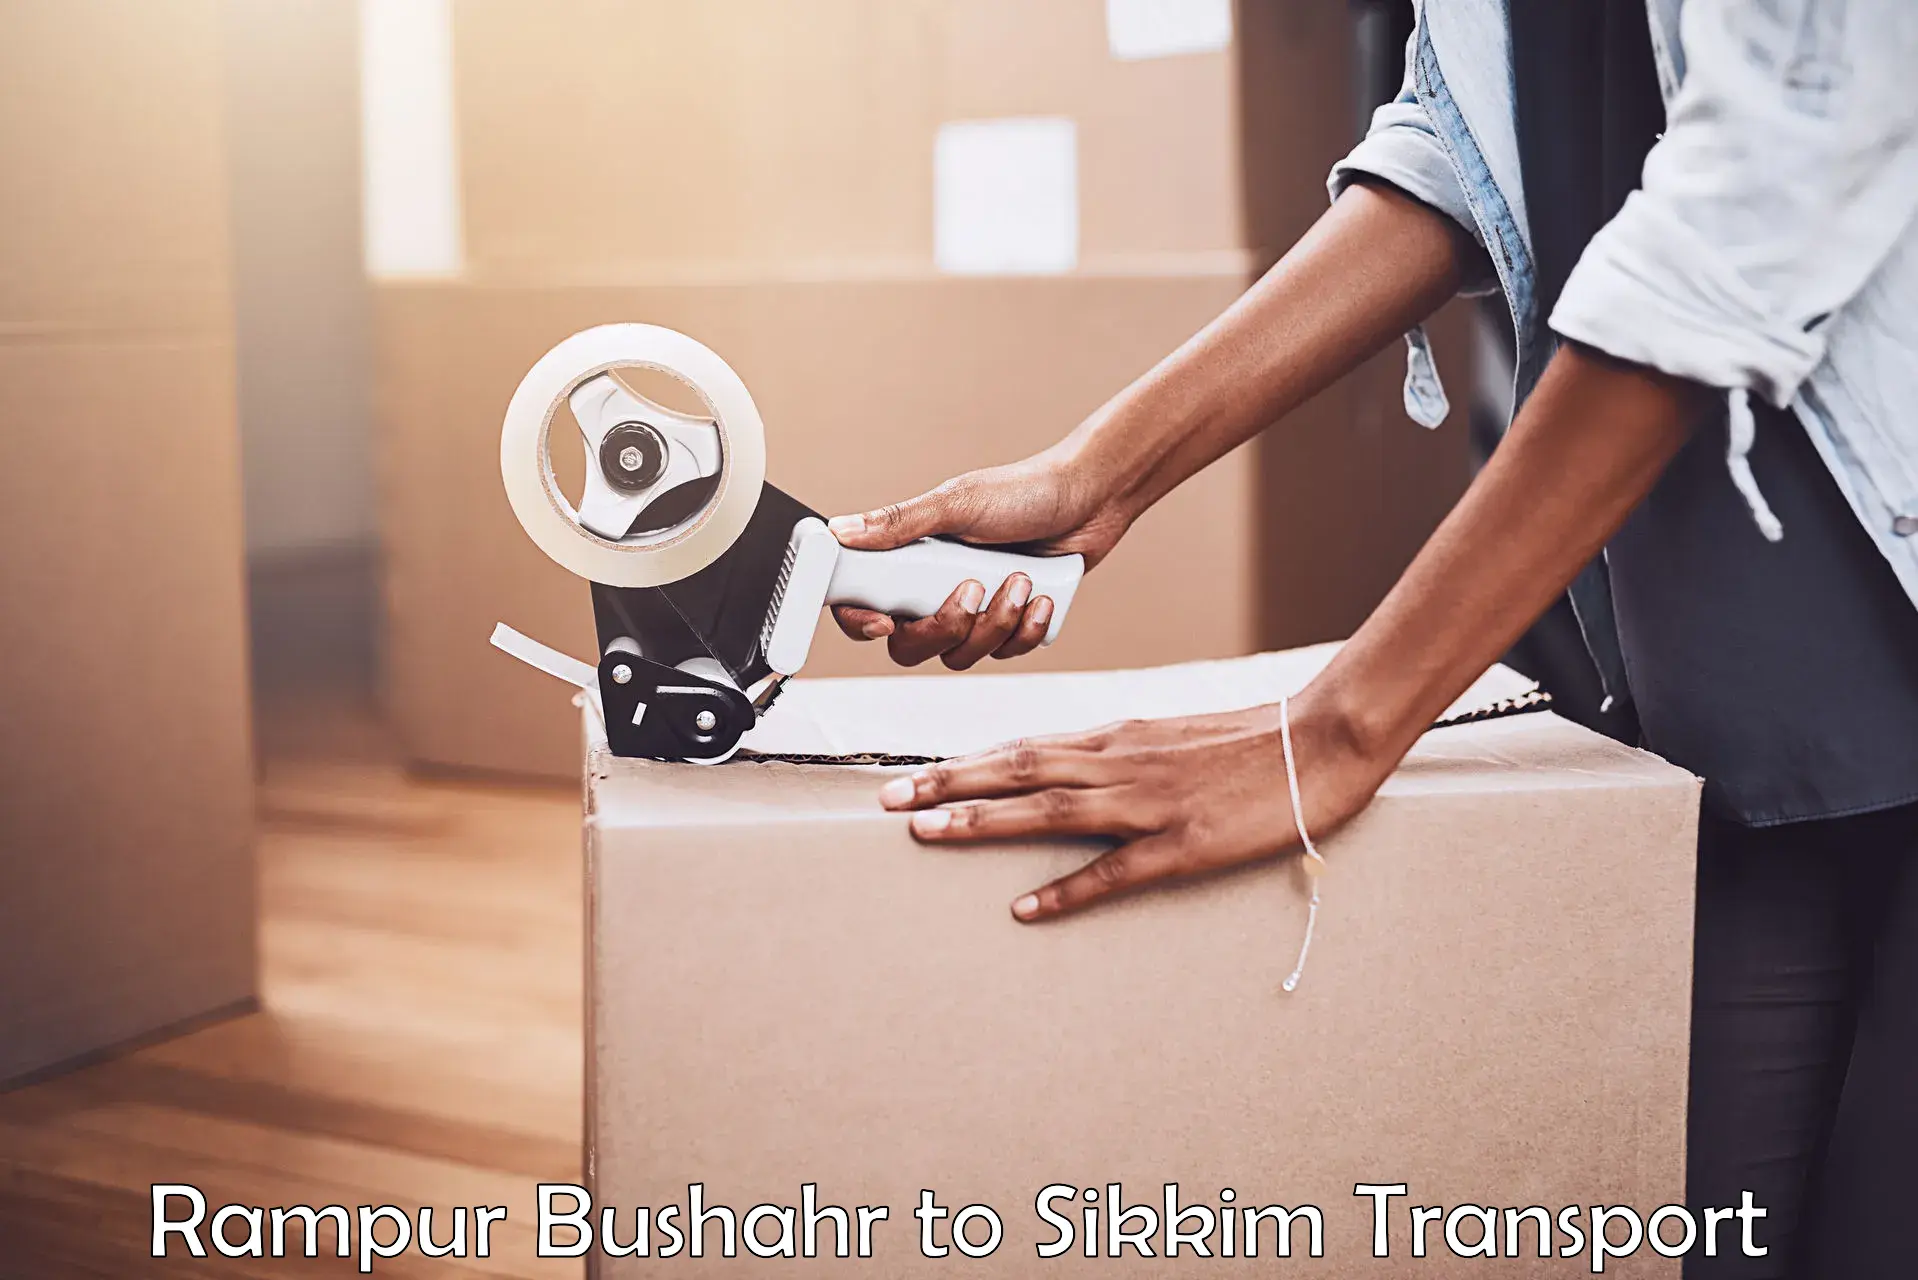 Commercial transport service Rampur Bushahr to Sikkim